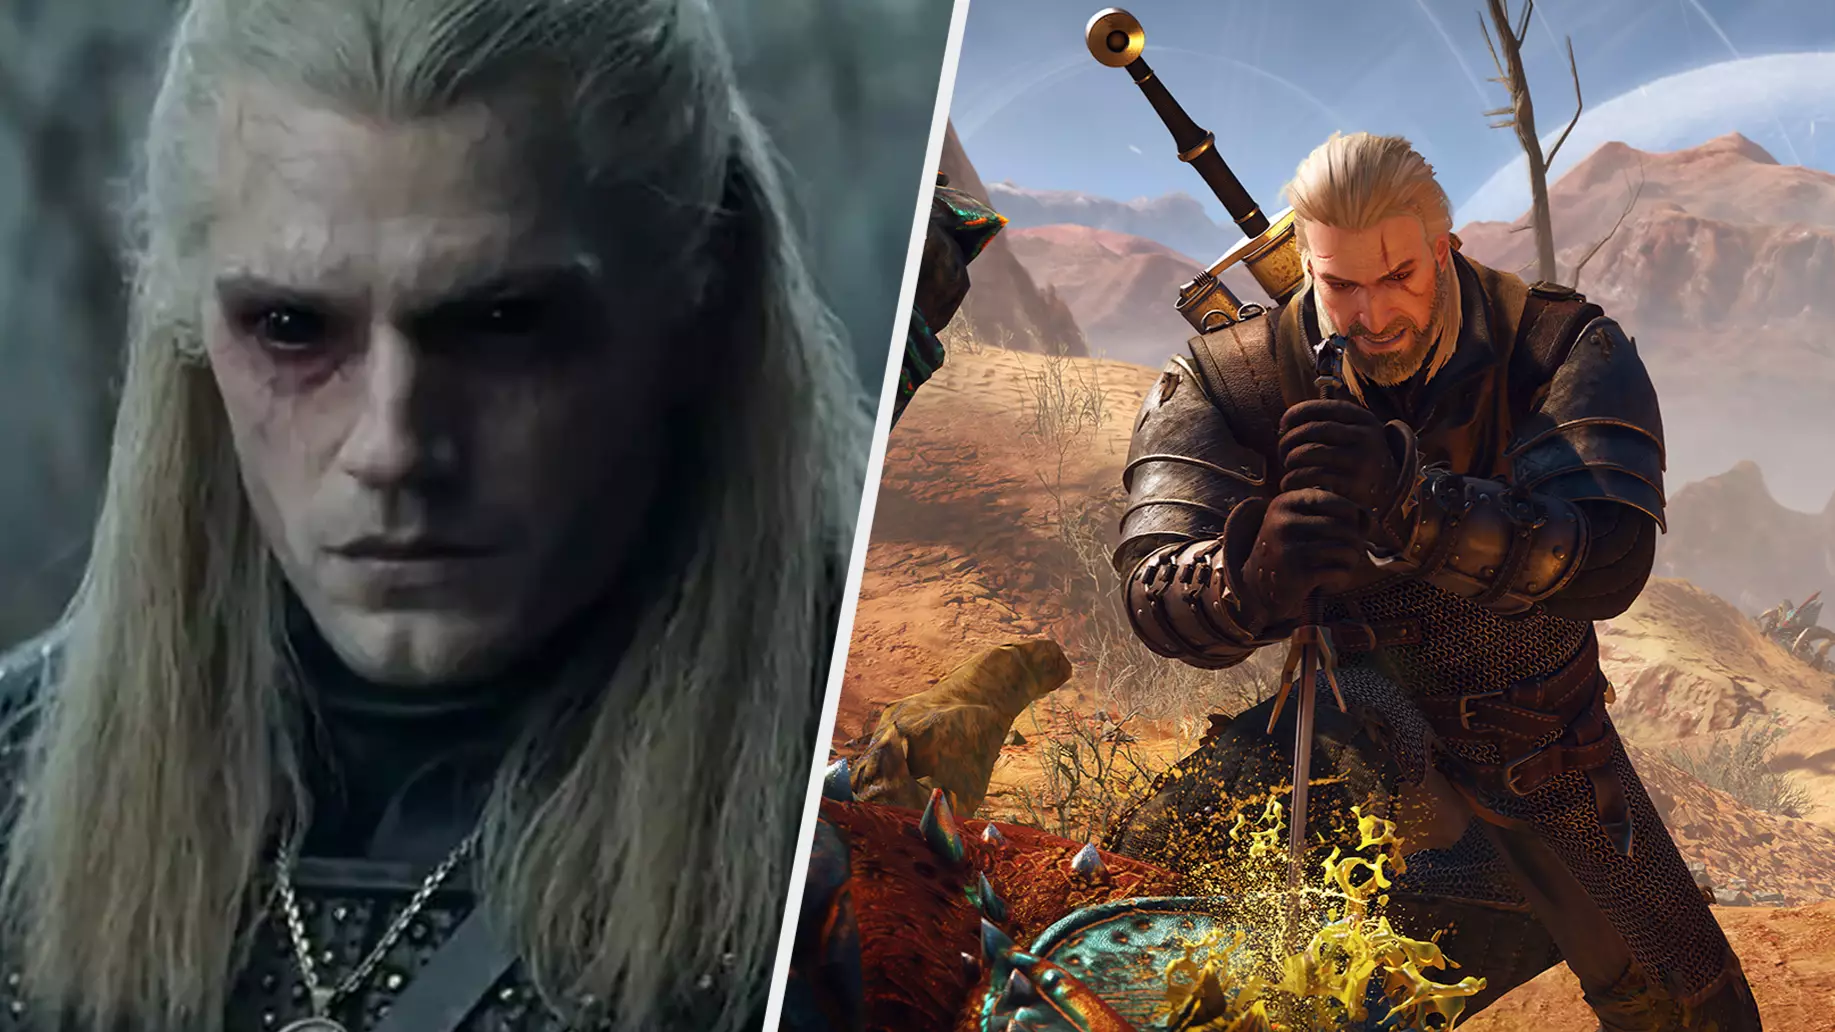 'The Witcher' Season Two Features Classic Monster From The Games, According To Report